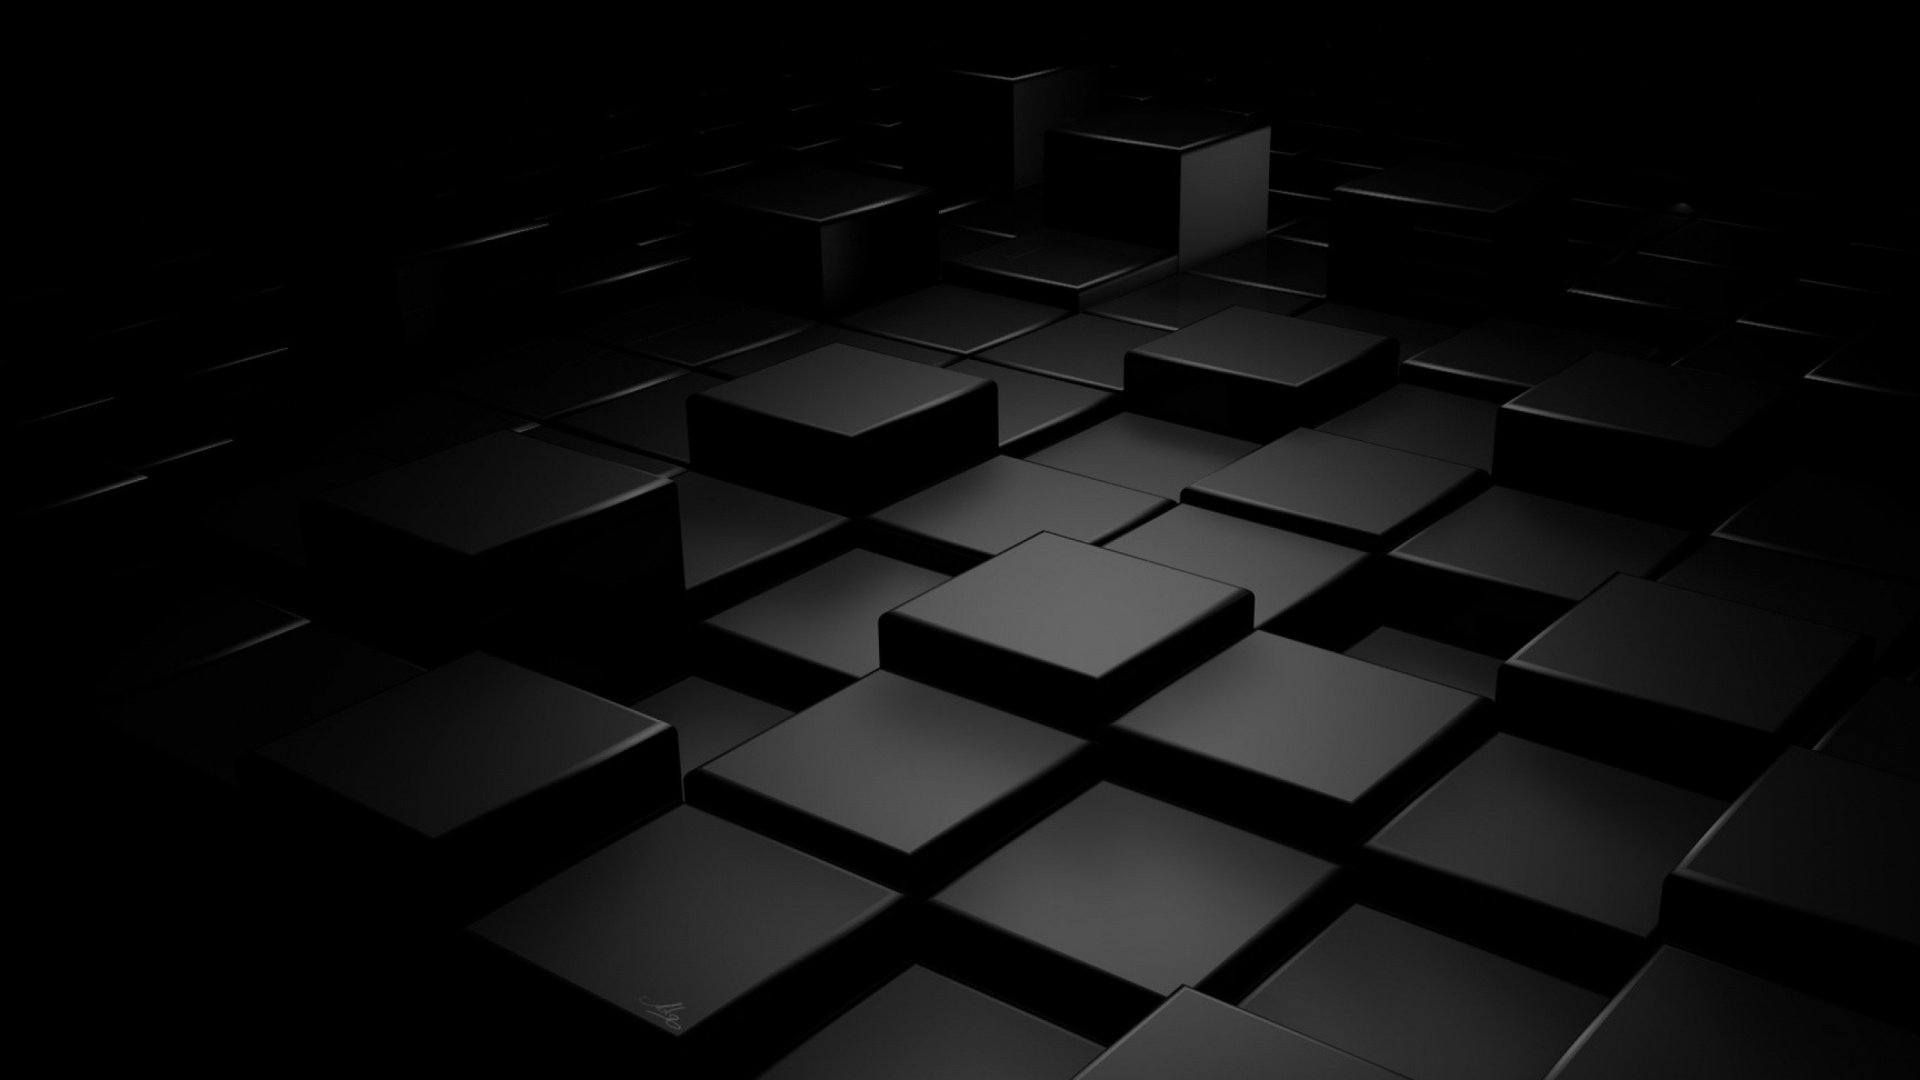 Black and White Checkered Illustration. Wallpaper in 1920x1080 Resolution